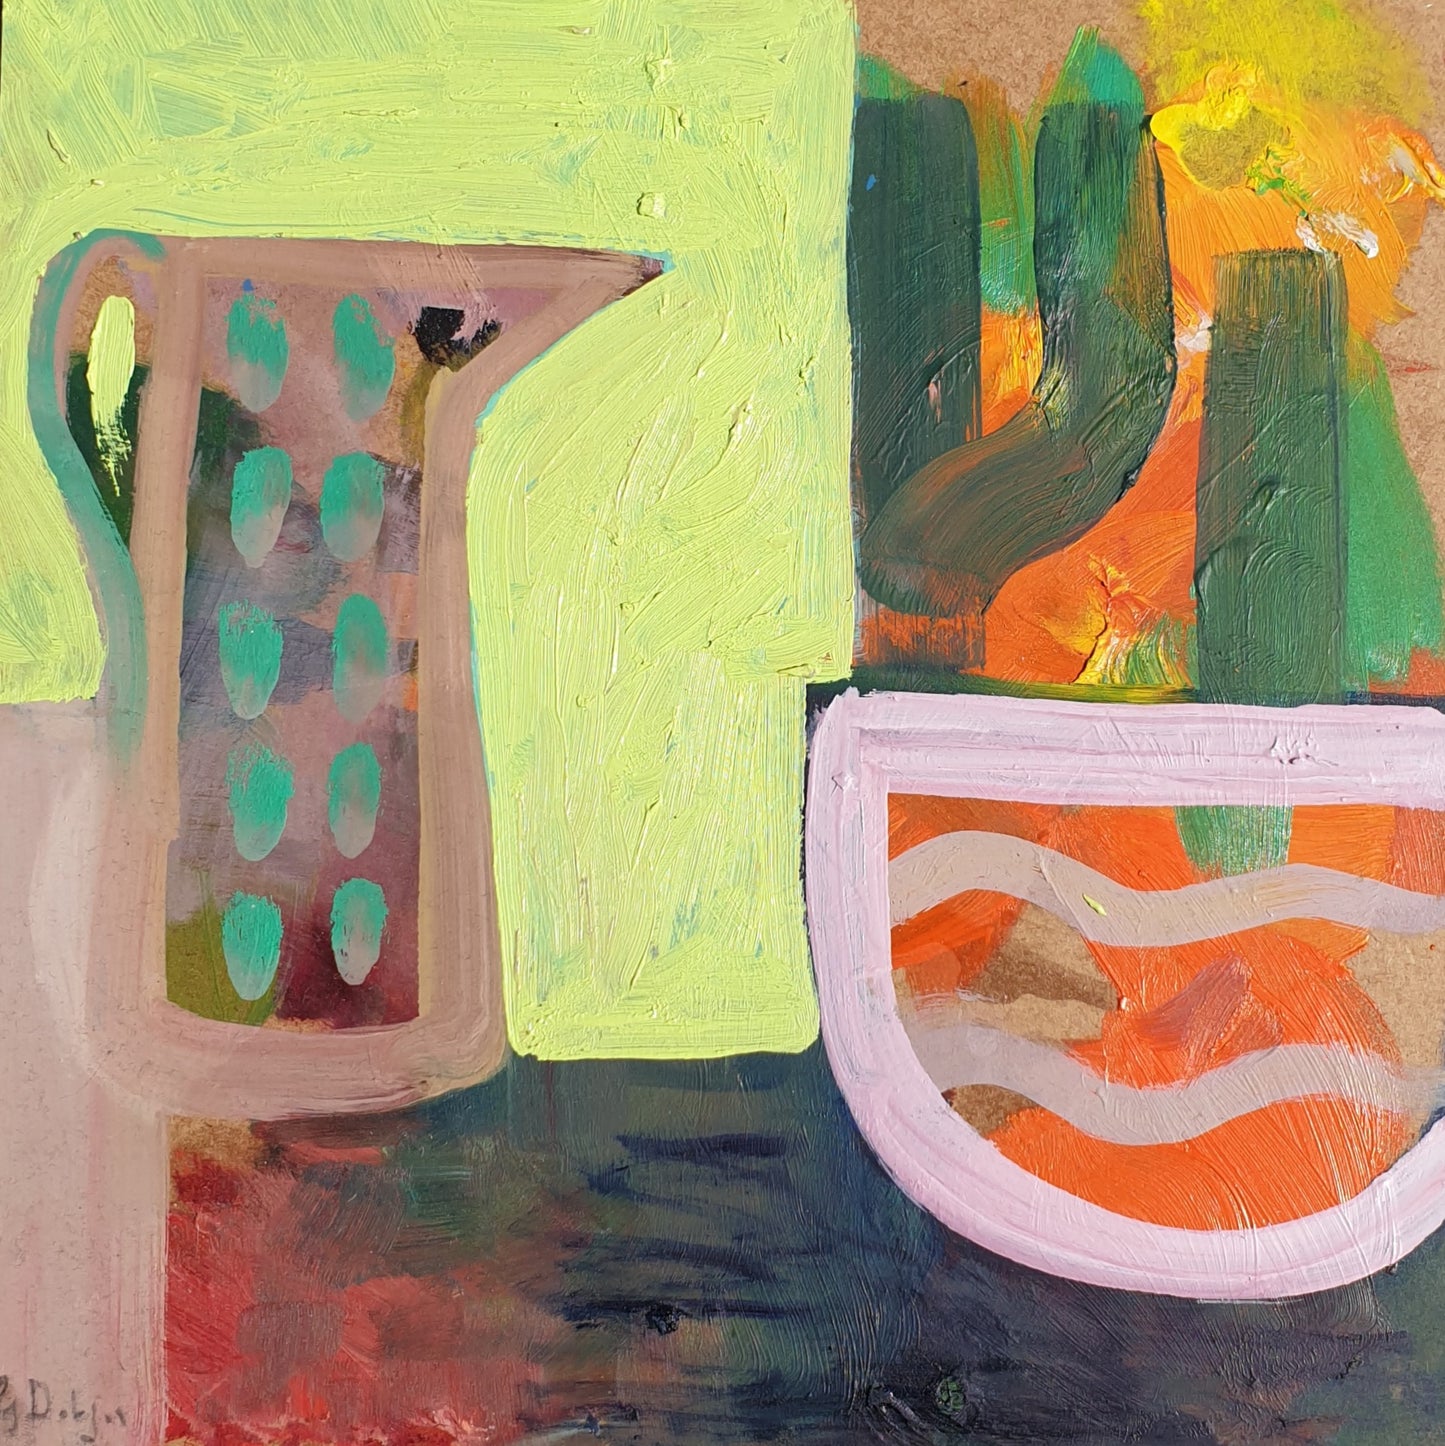 Cactus in a bowl and jug